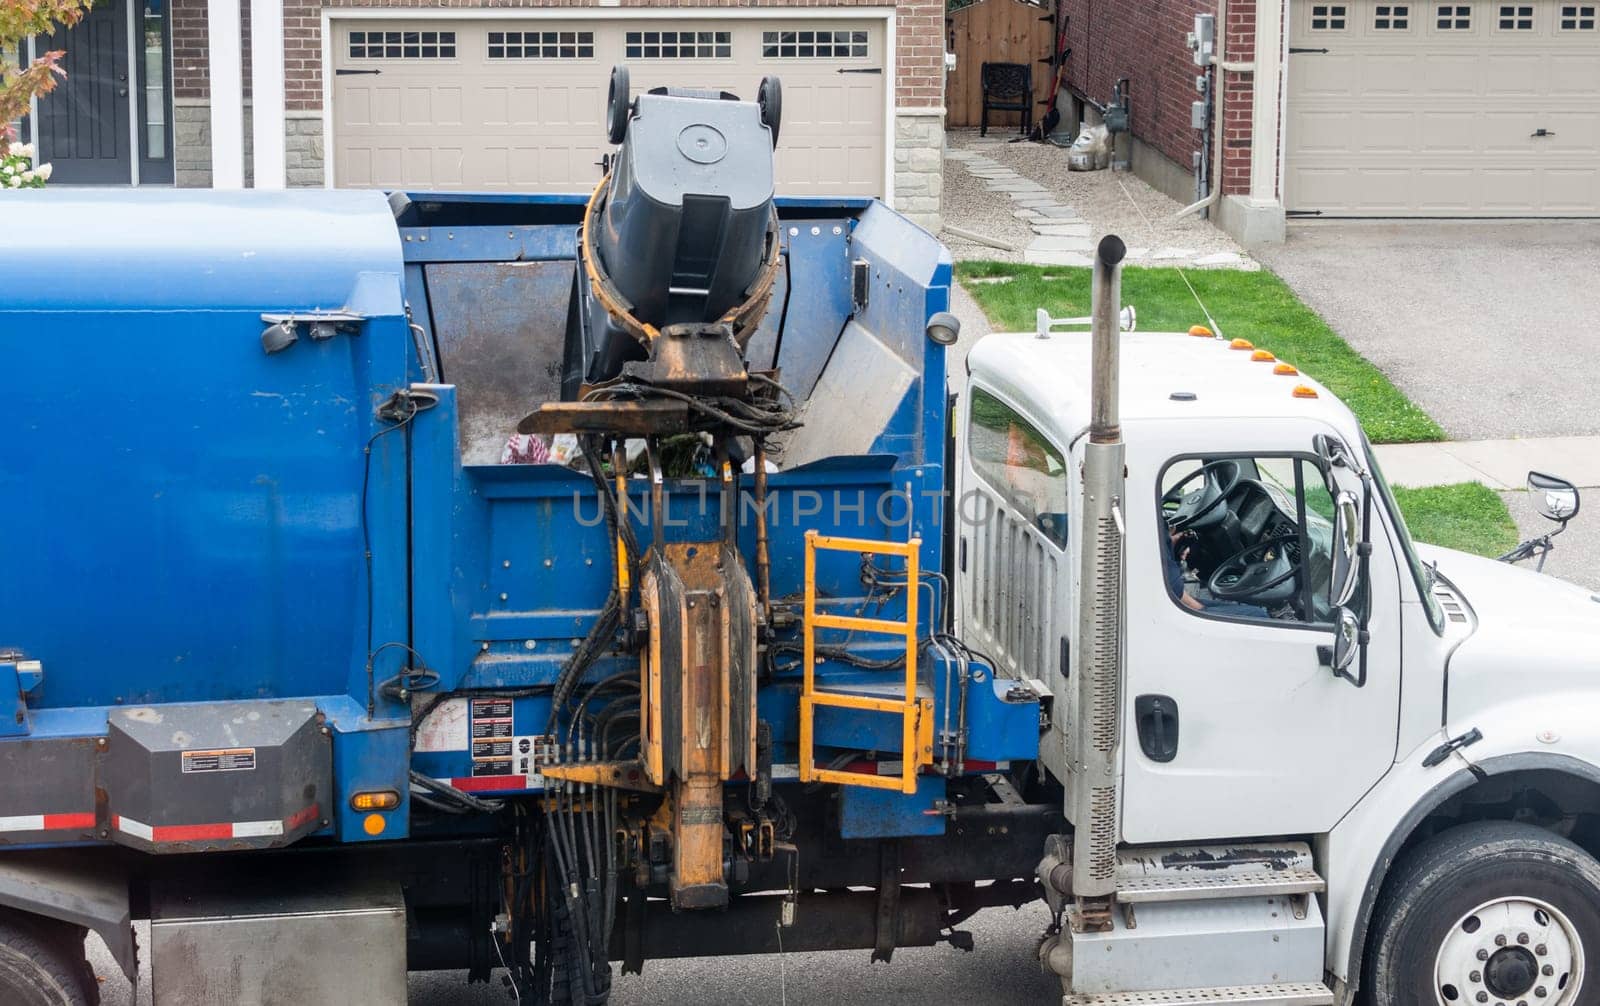 A mechanical hand lifts a standing rubbish bin and loads it into the desired section of the garbage truck